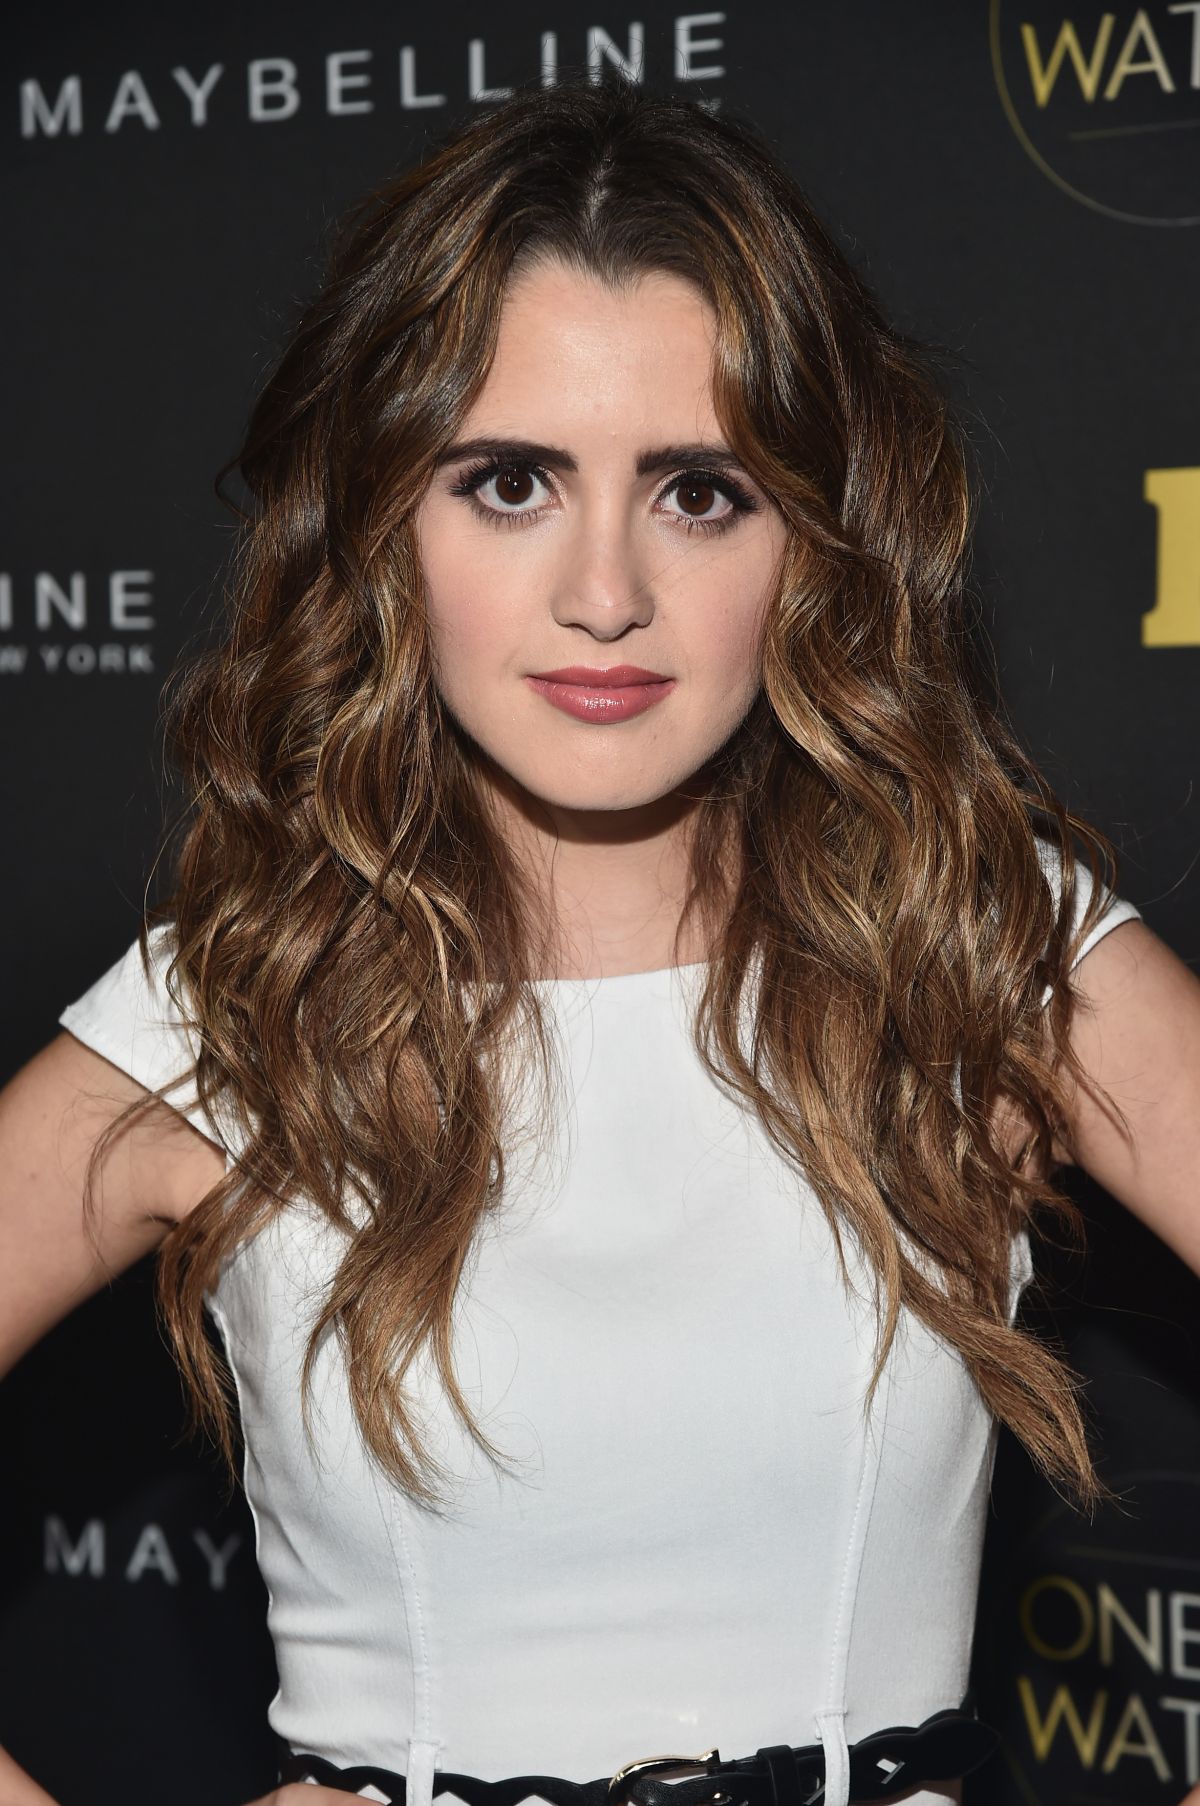 LAURA MARANO at People’s Ones to Watch in Hollywood 10/13/2016 HawtCelebs